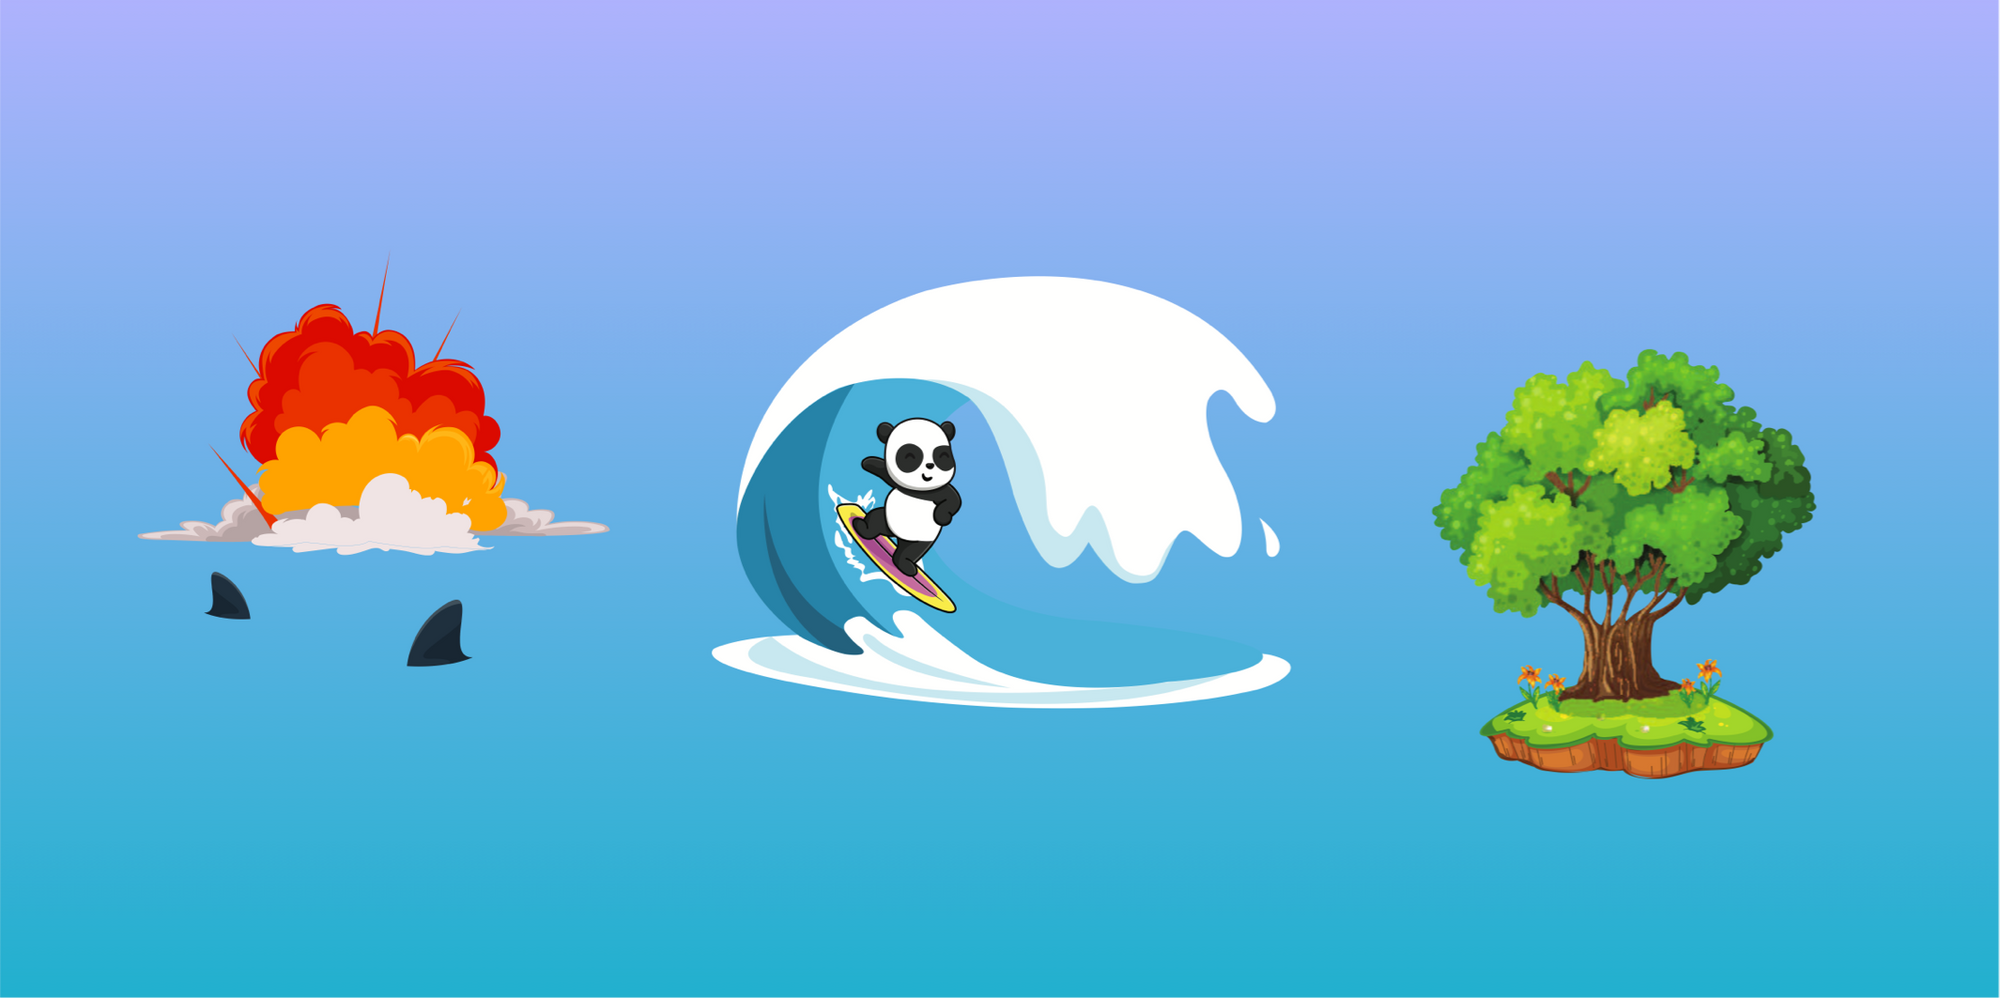 Panda surfing away from shark-infested explosion towards a green island with an oak tree and flowers.